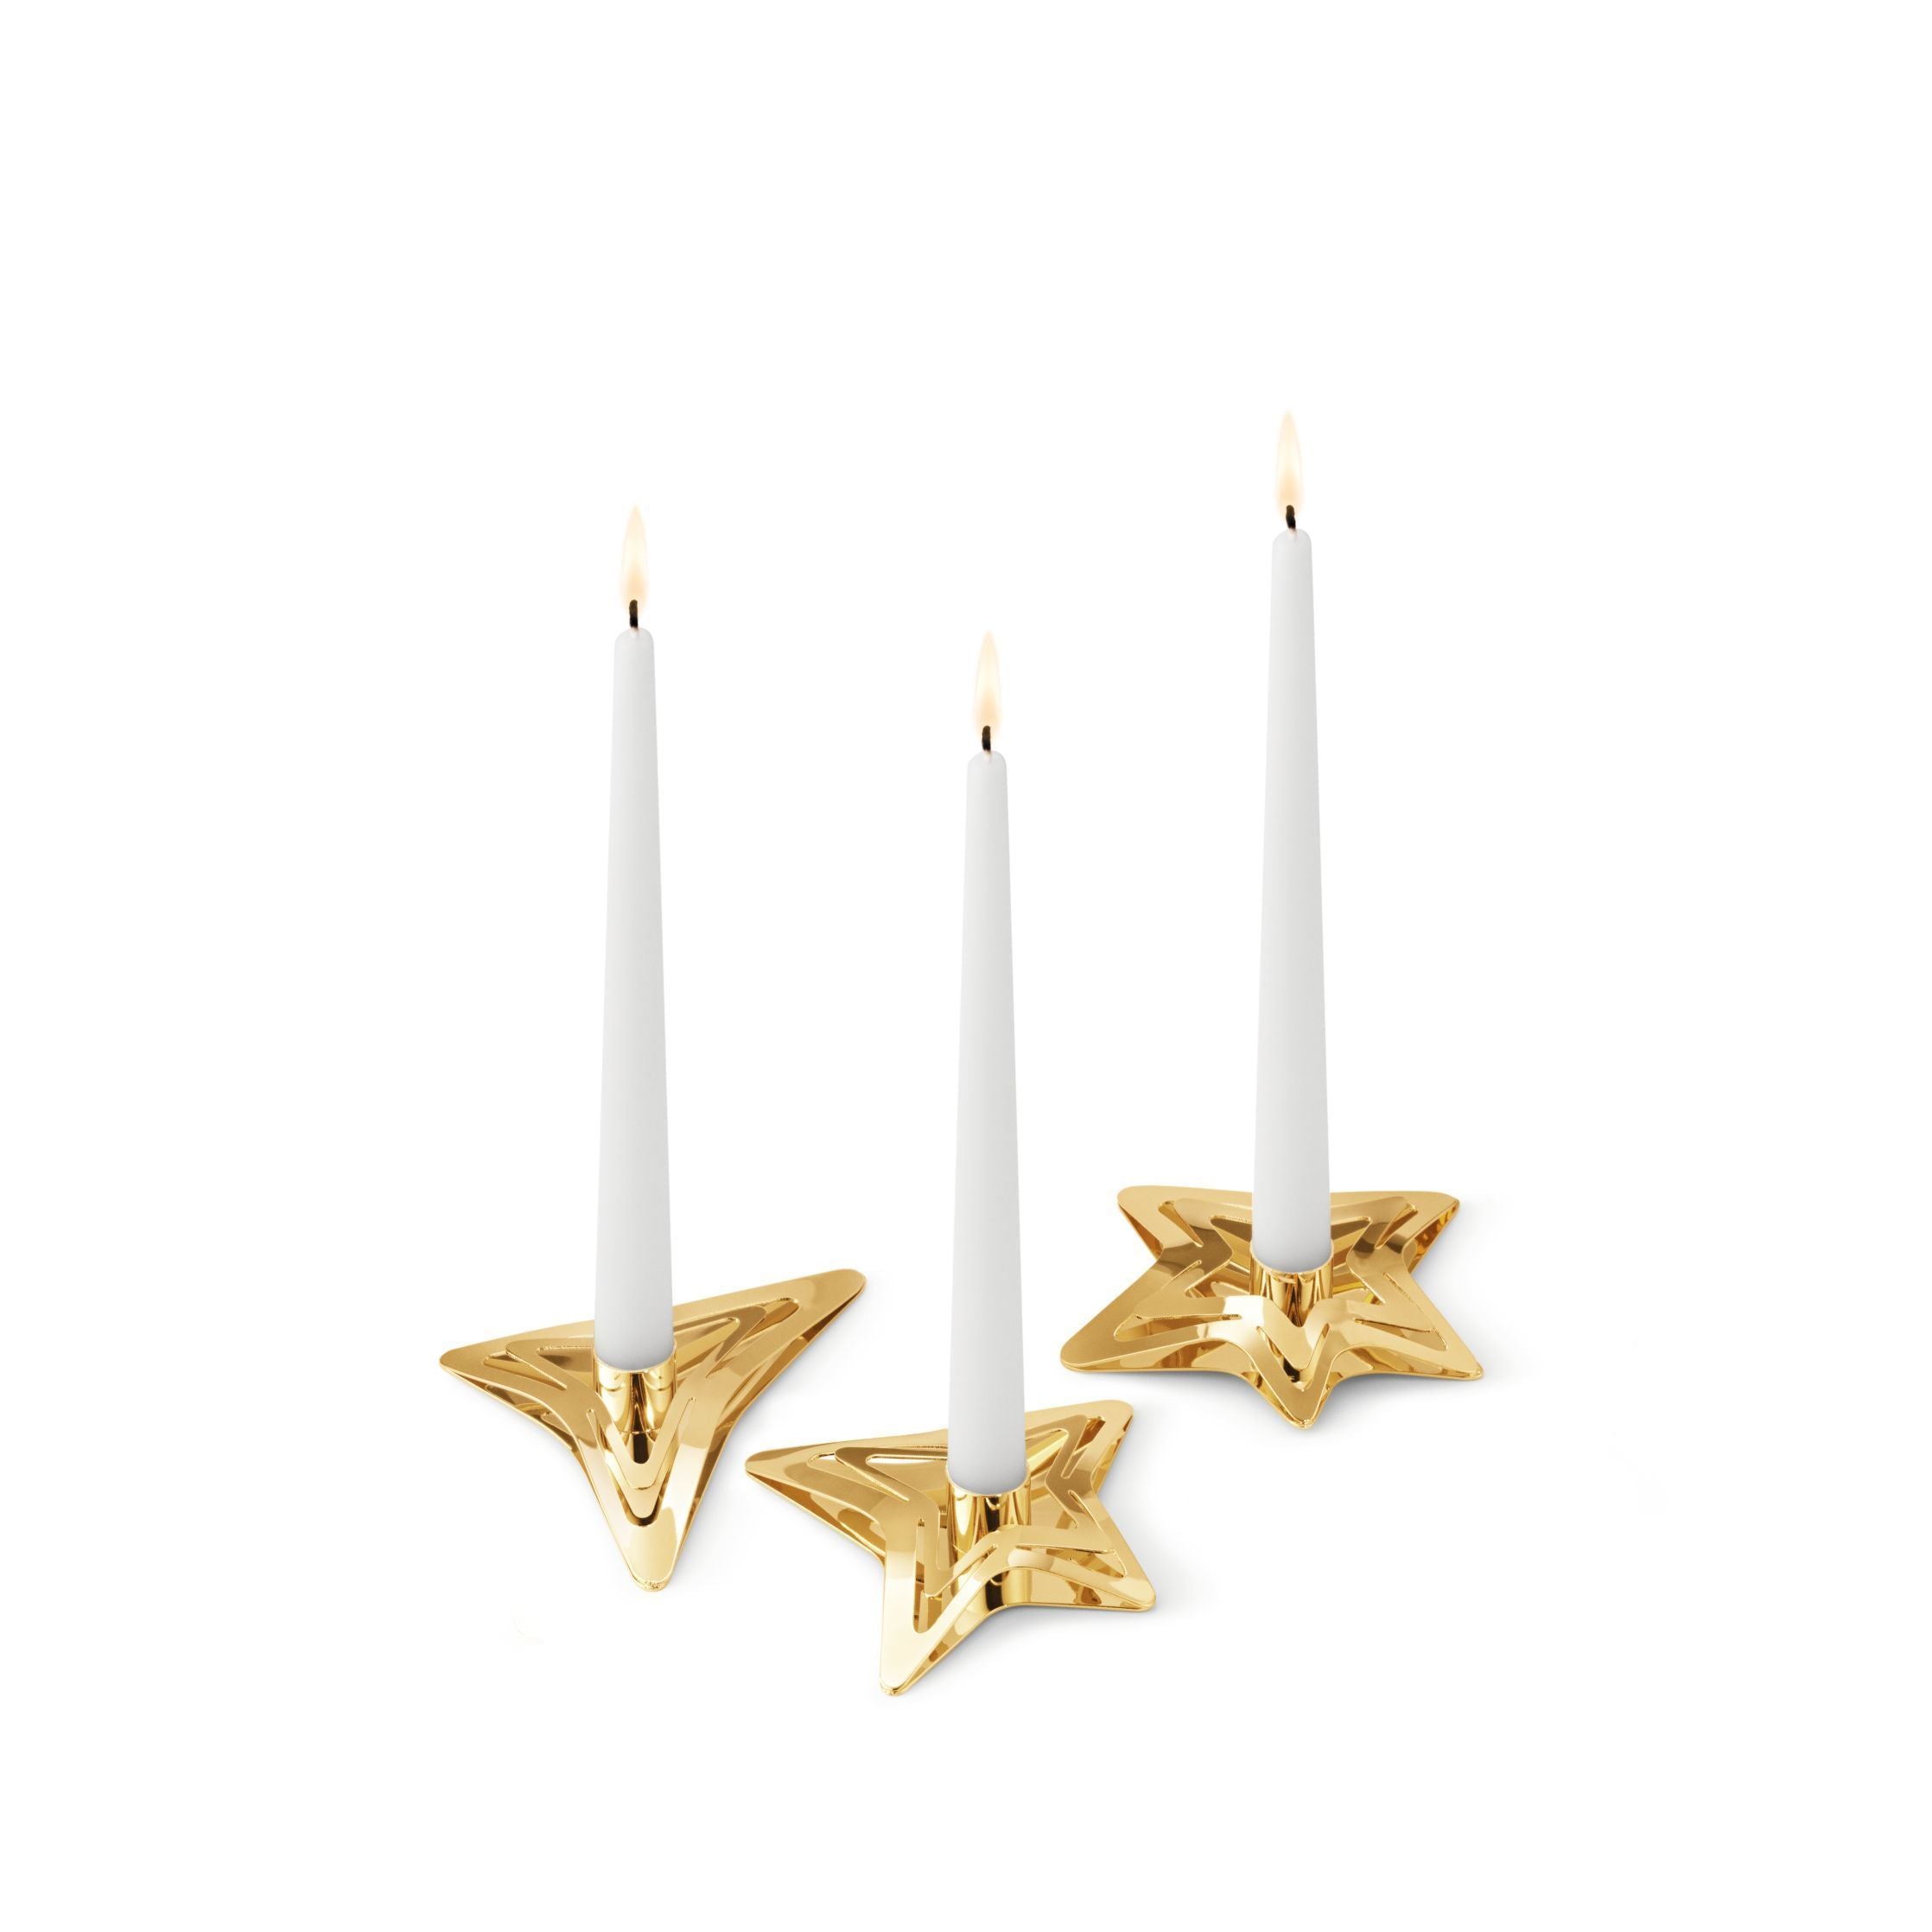 Georg Jensen Christmas Candle Holder, 3 Stcs.